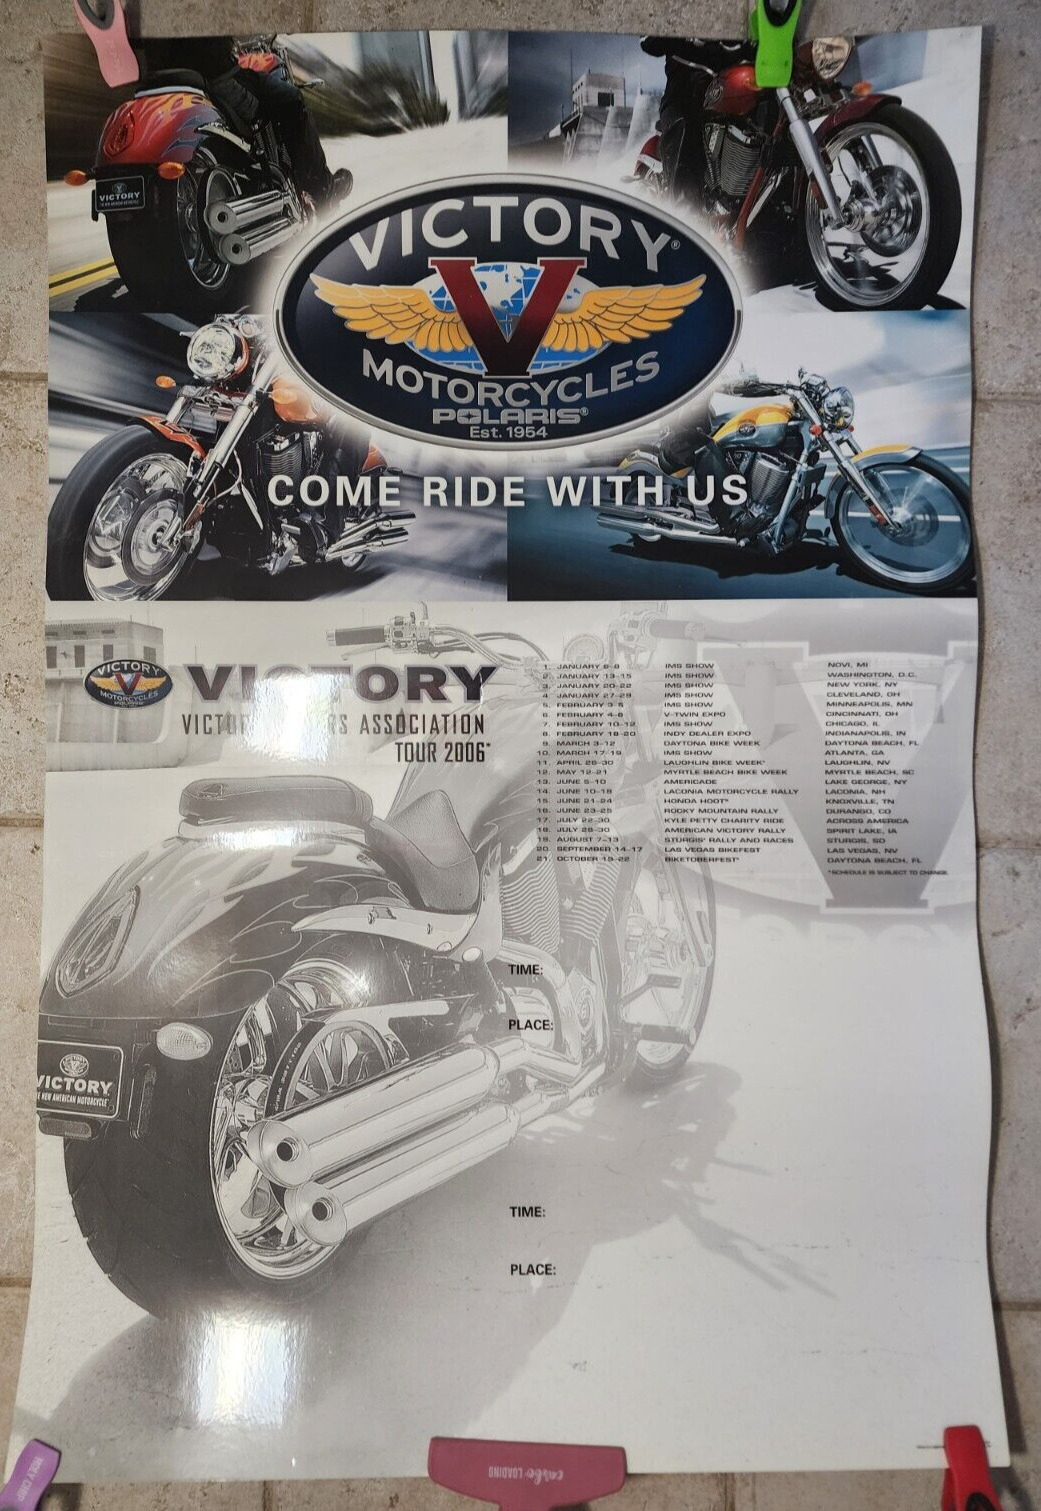 Large VICTORY Motorcycles Riders Association Tour Poster 2006 - Laminated 27x40